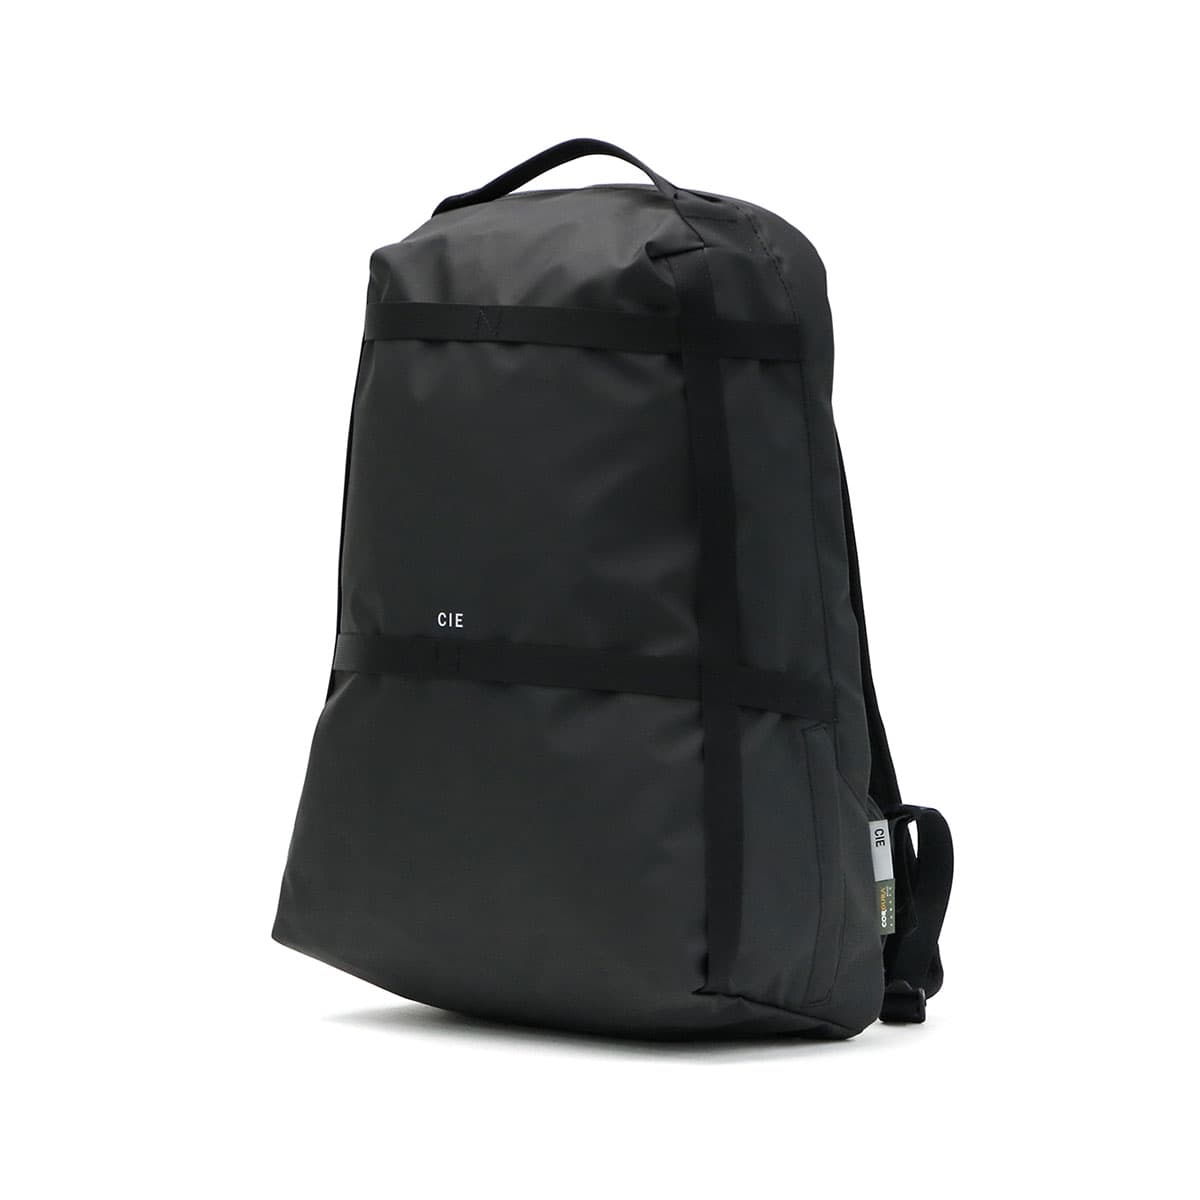 CIE シー GRID3 BACKPACK バックパック 032050｜【正規販売店】カバン